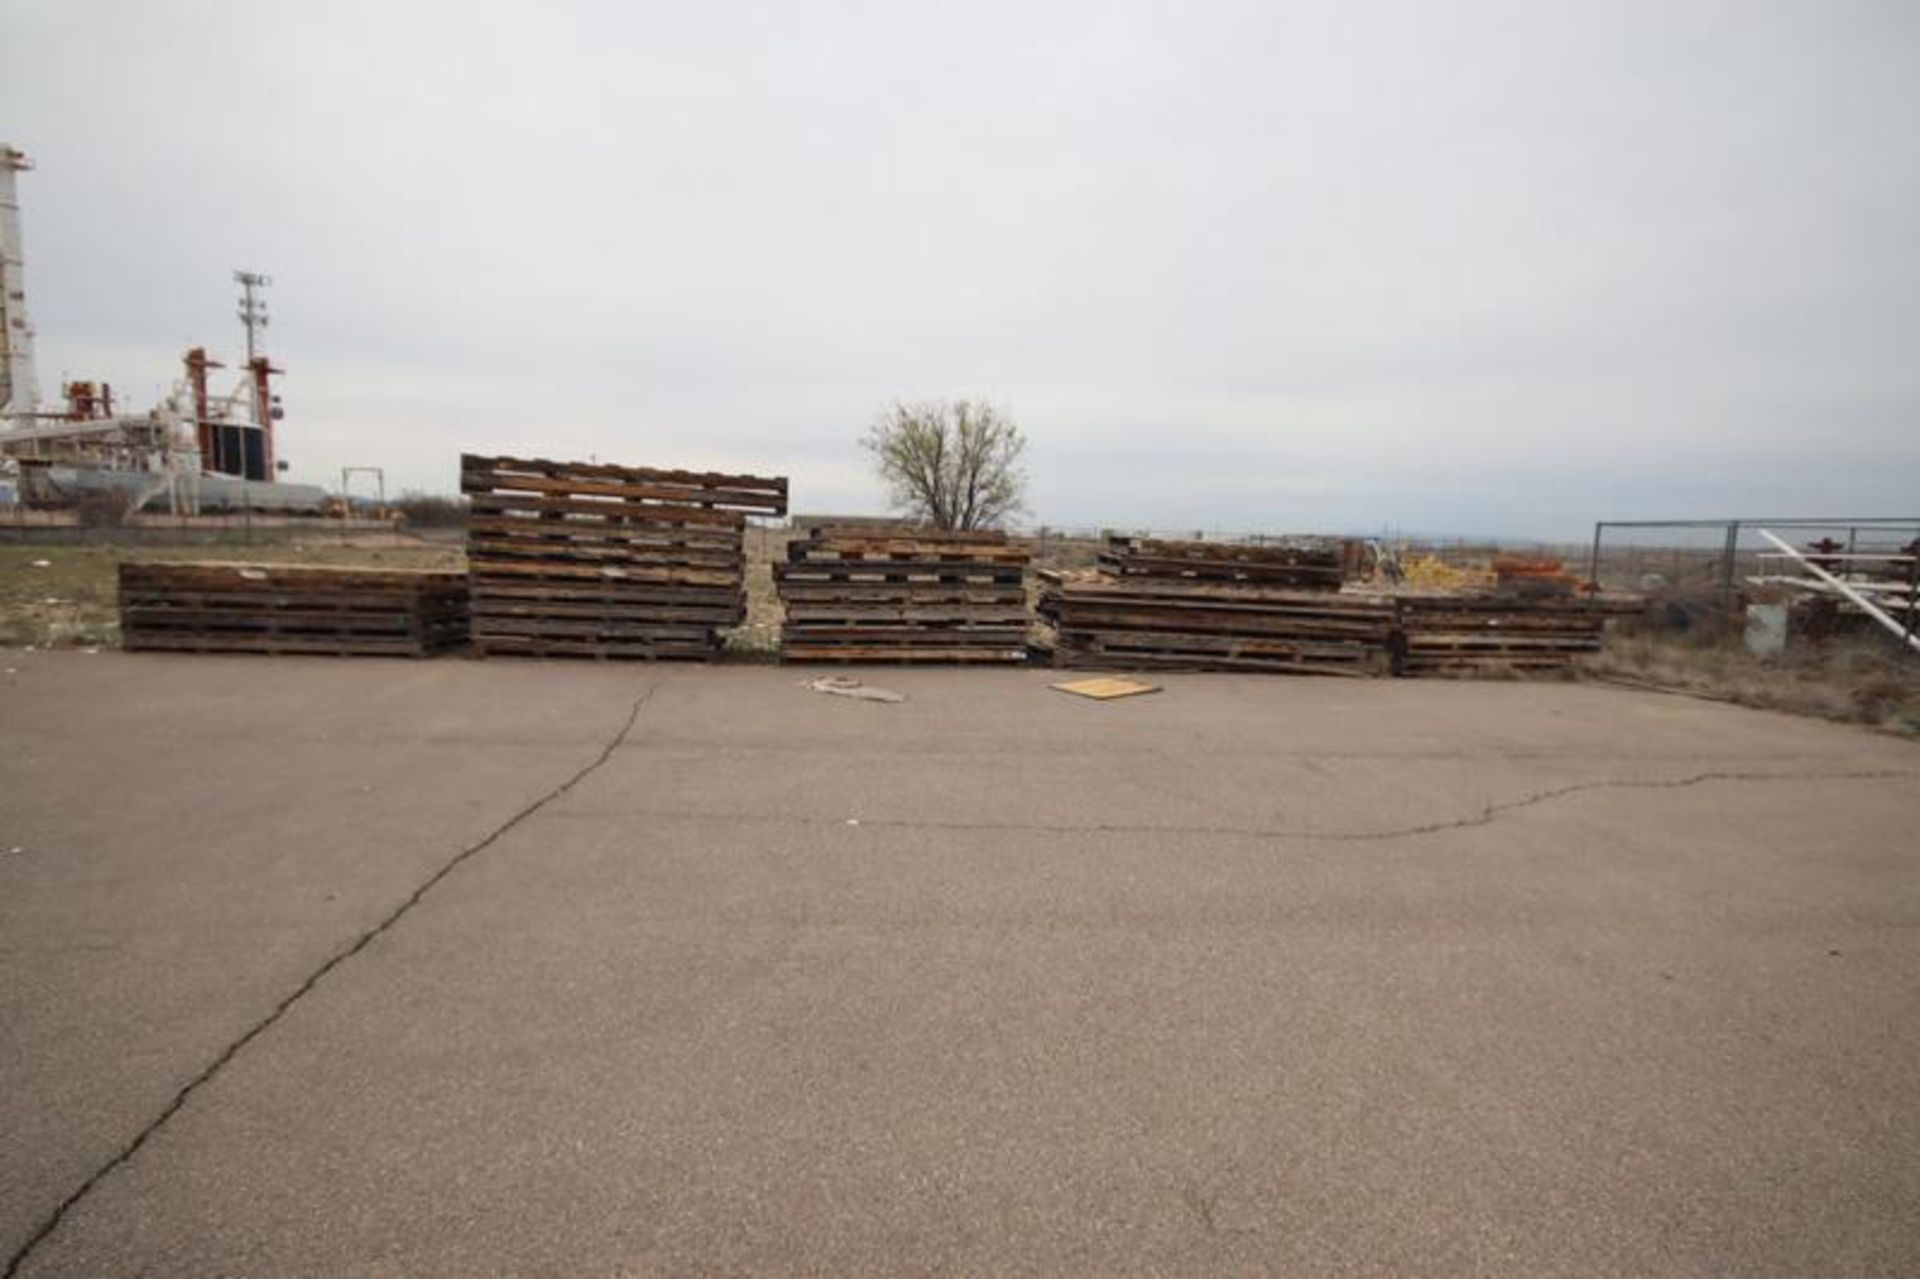 All Empty Wood Skids and Pallets in Yard